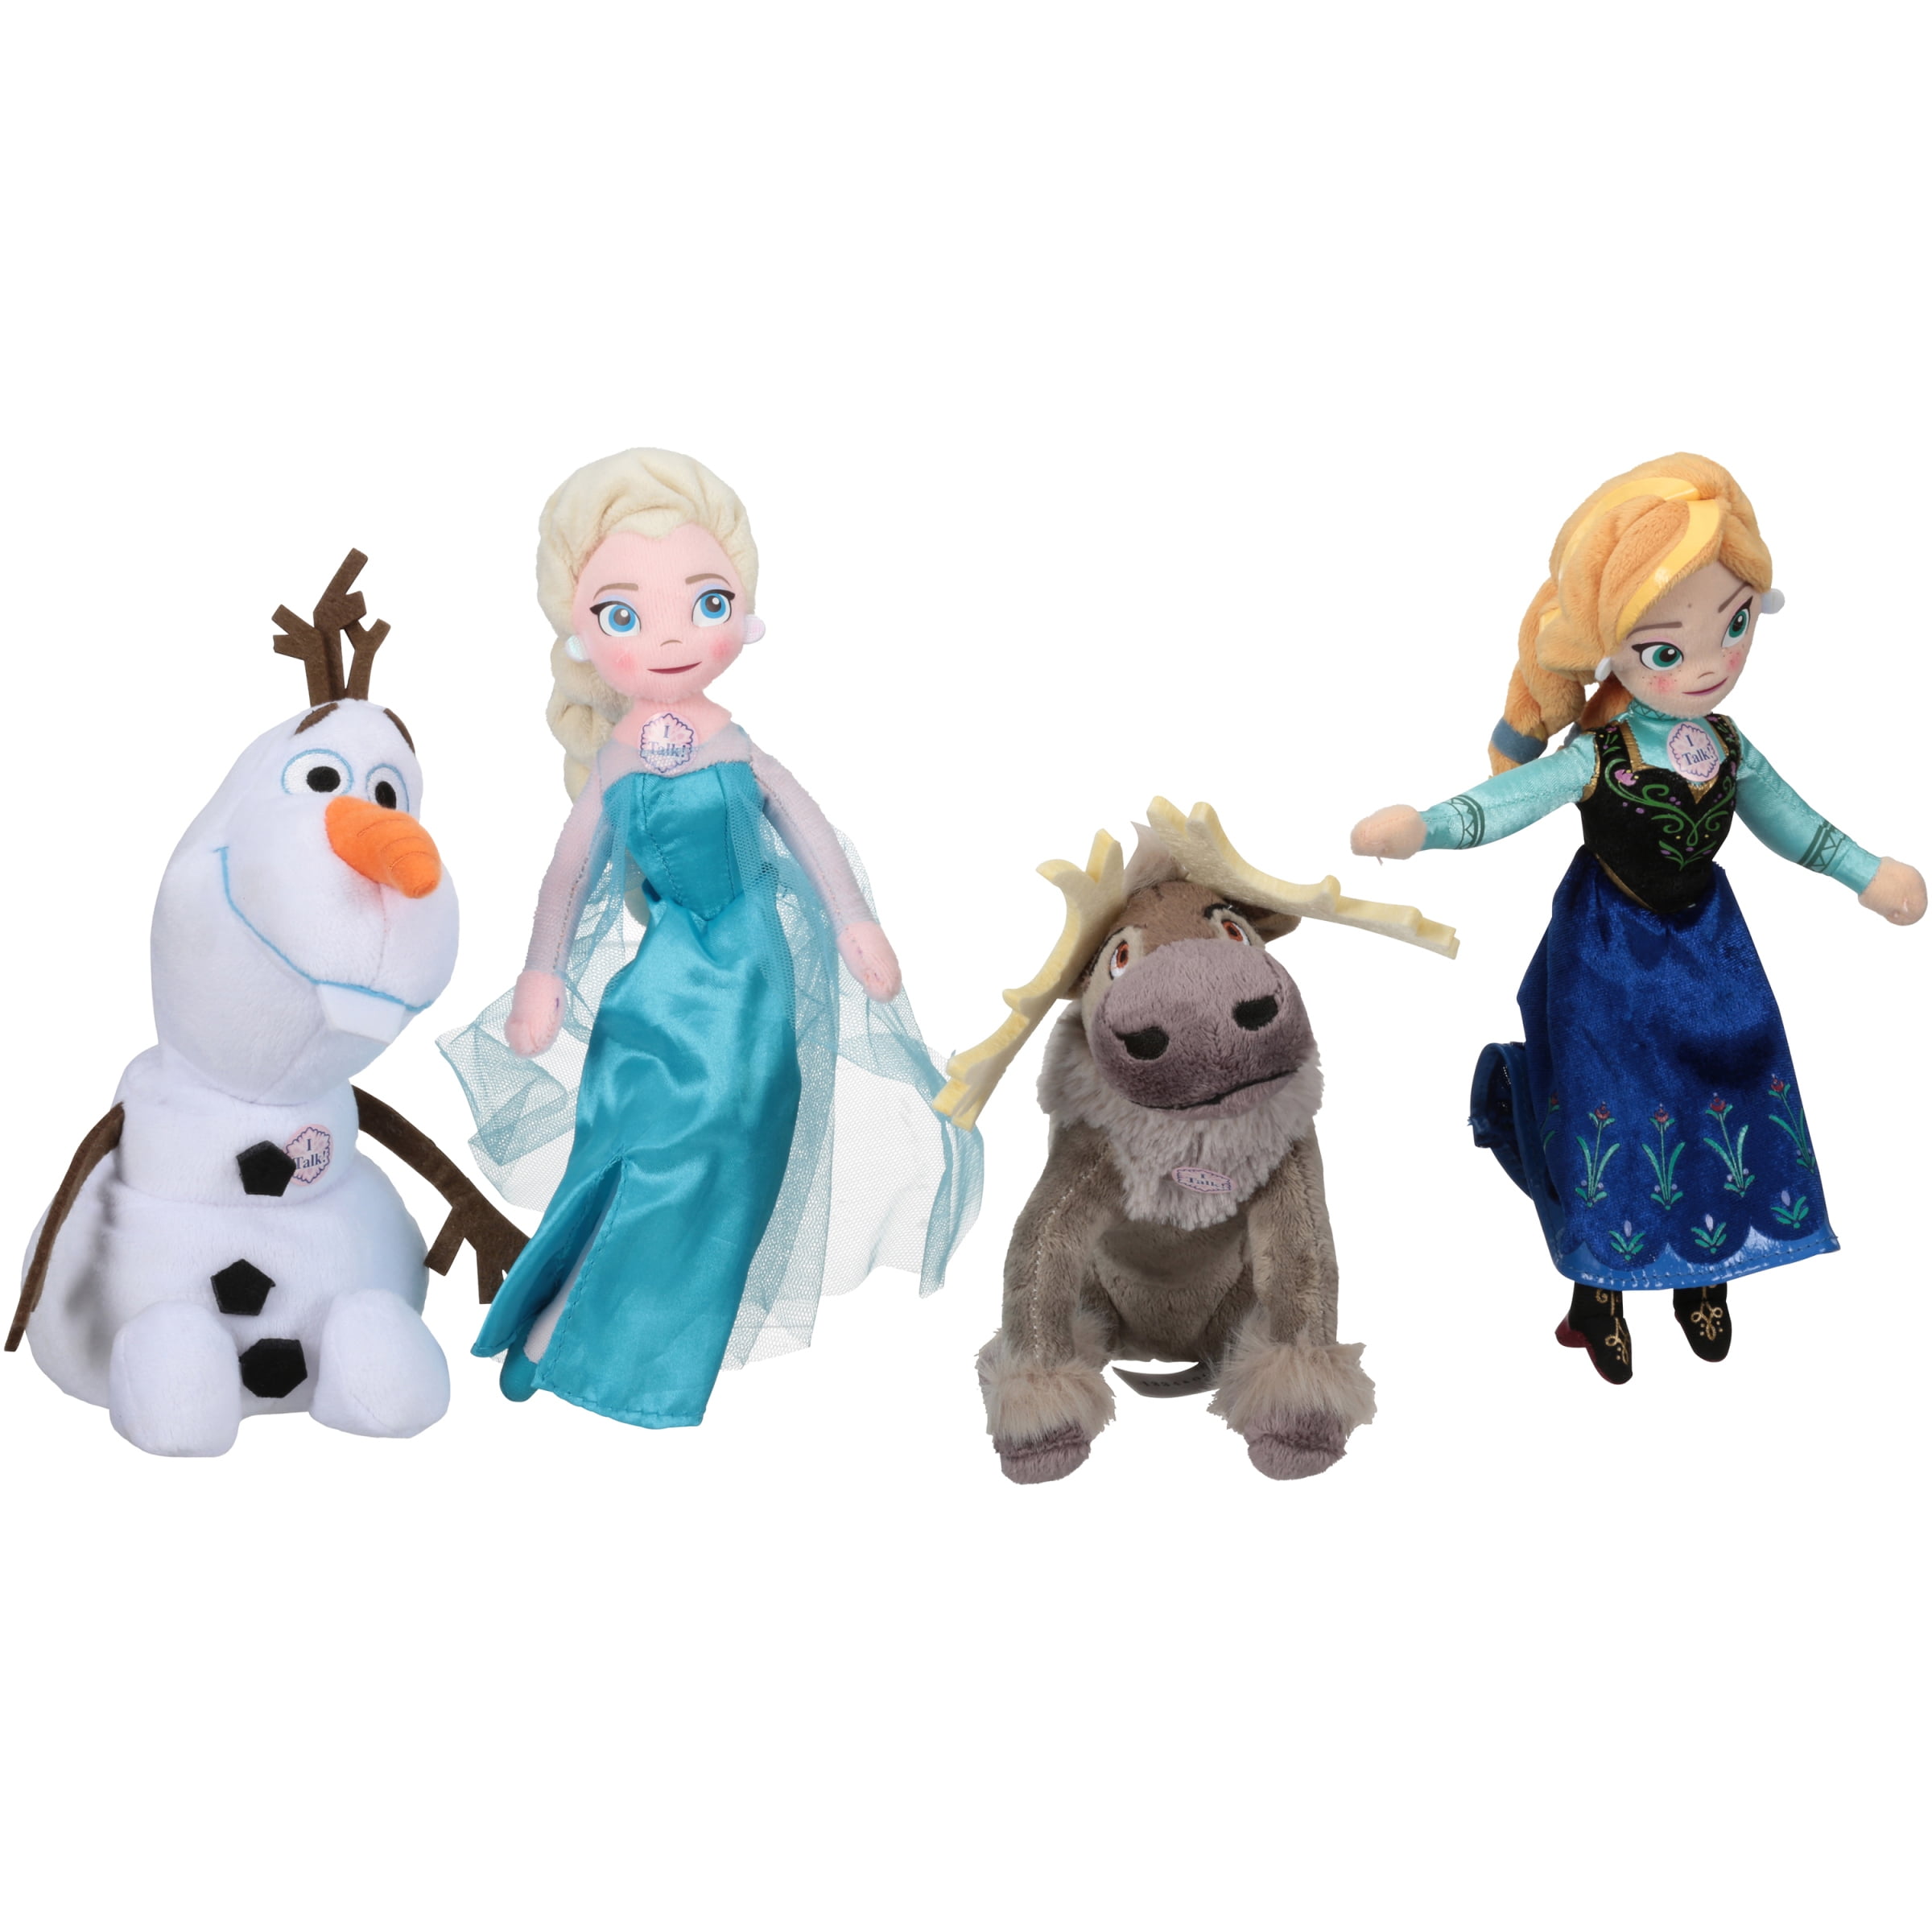 SVEN SOFT TOYS CHOOSE YOUR FAVORITE ONE DISNEY FROZEN PLUSH ANNA OLAF NEW